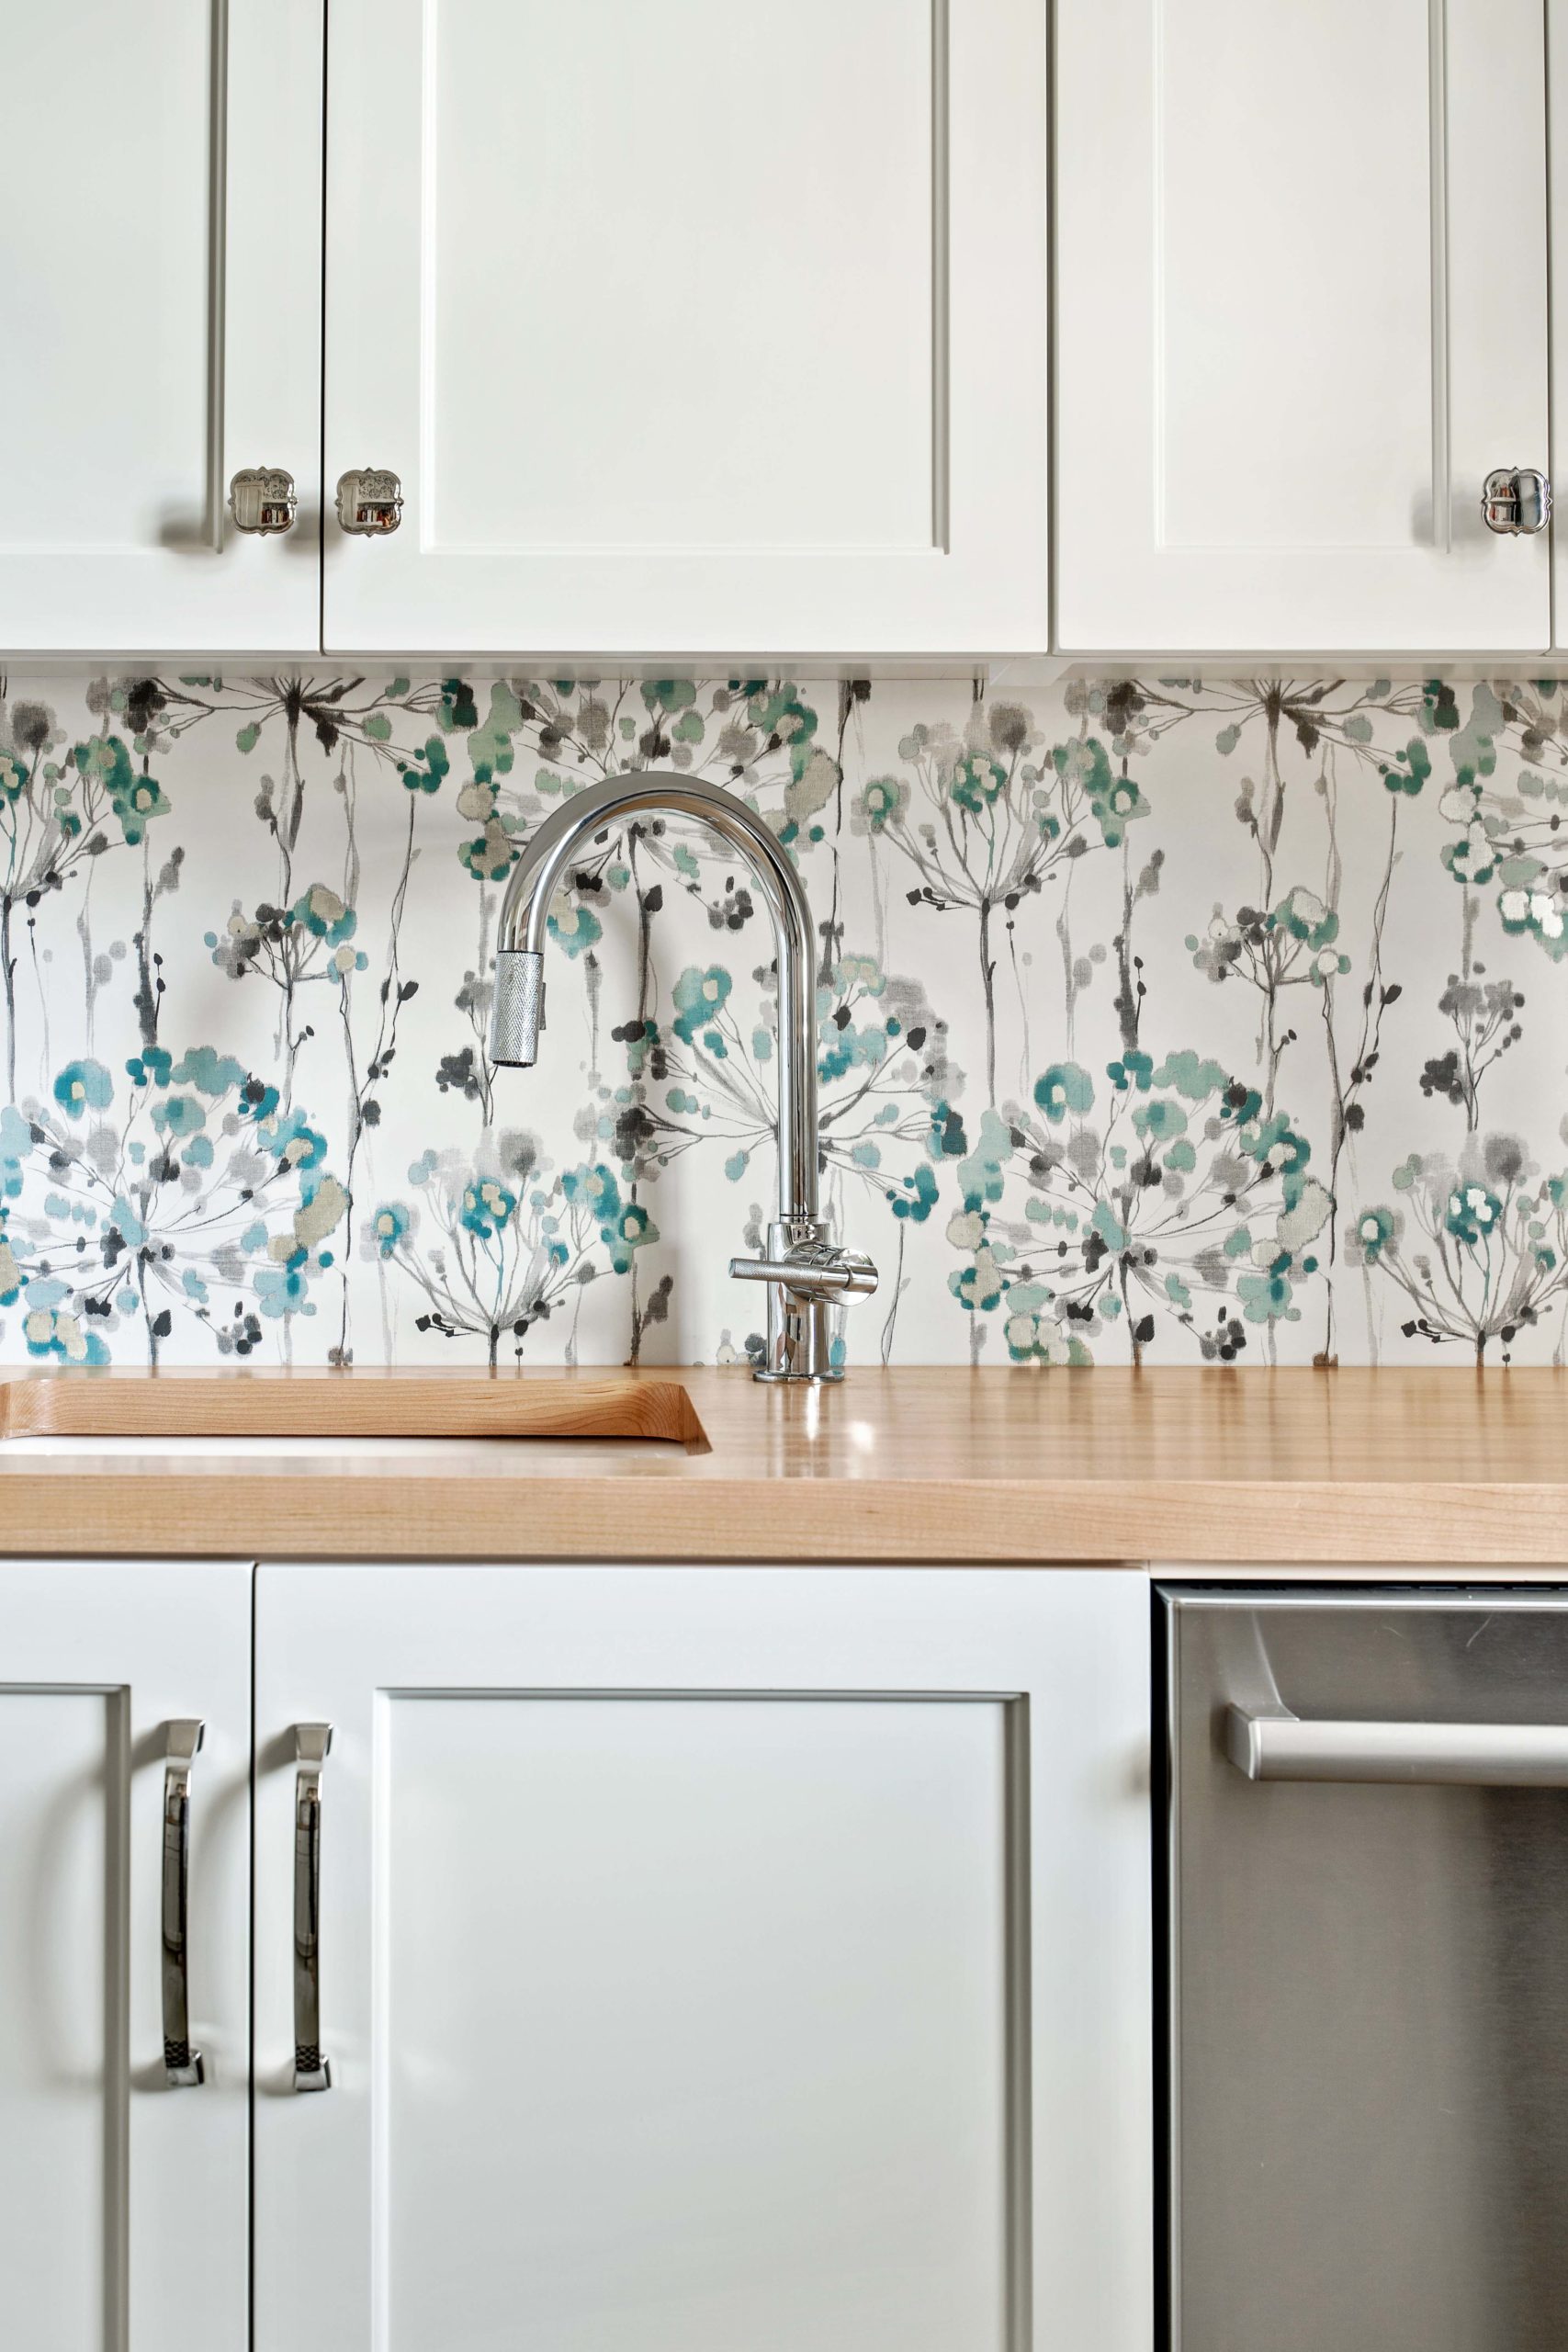 The Lake Escape custom home remodel features a white kitchen with a floral backsplash.